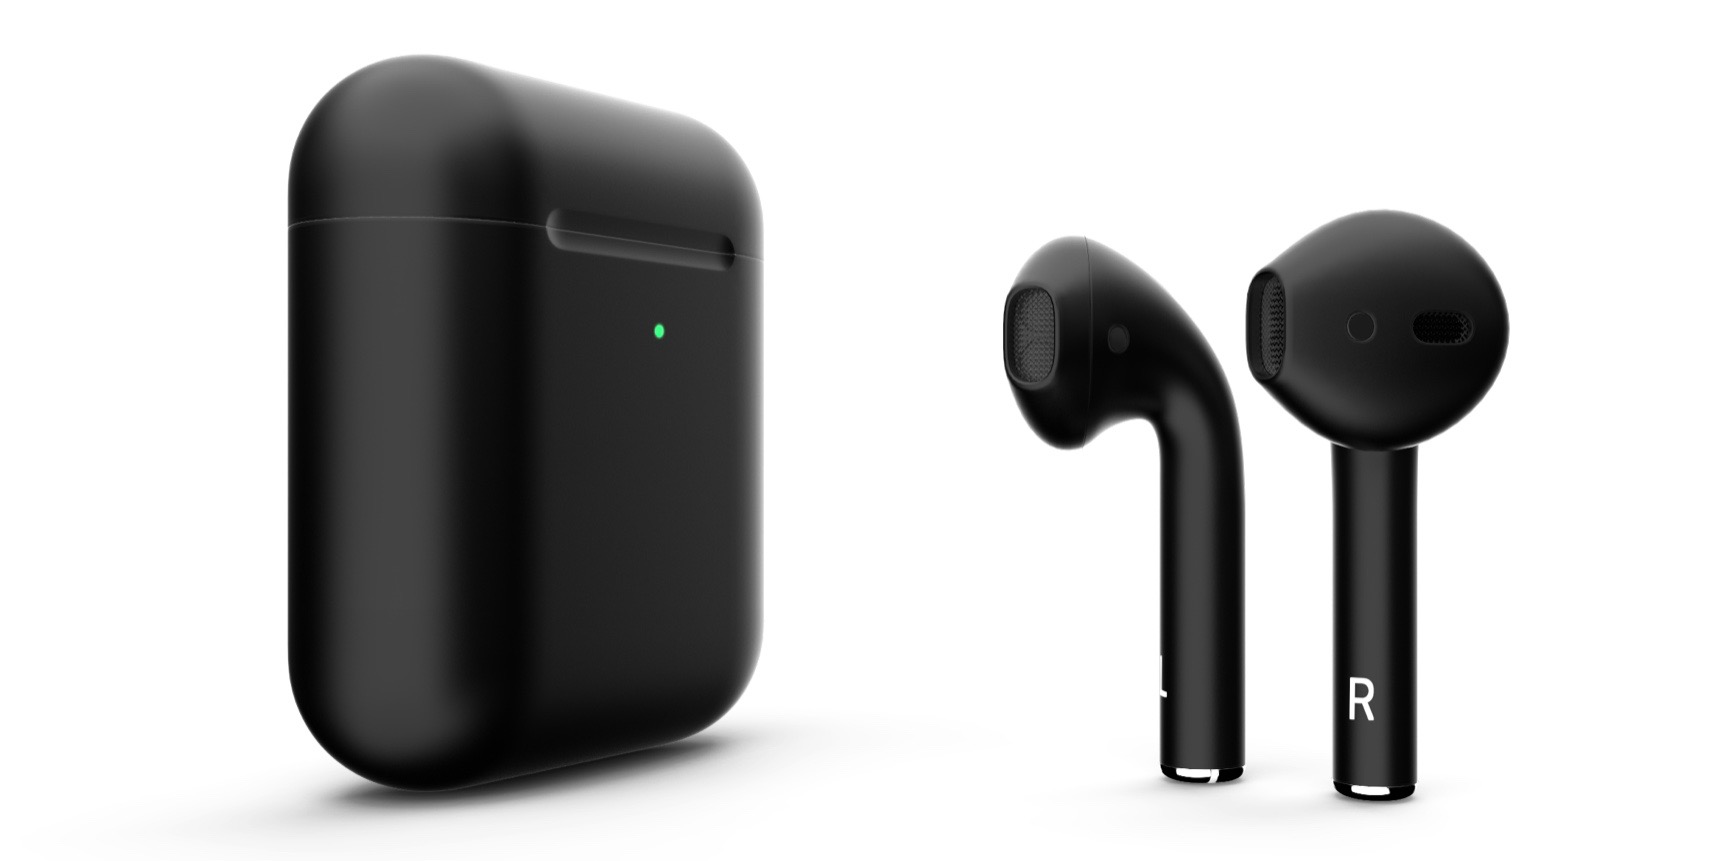 ColorWare custom AirPods 2 in glossy and matte finishes ...